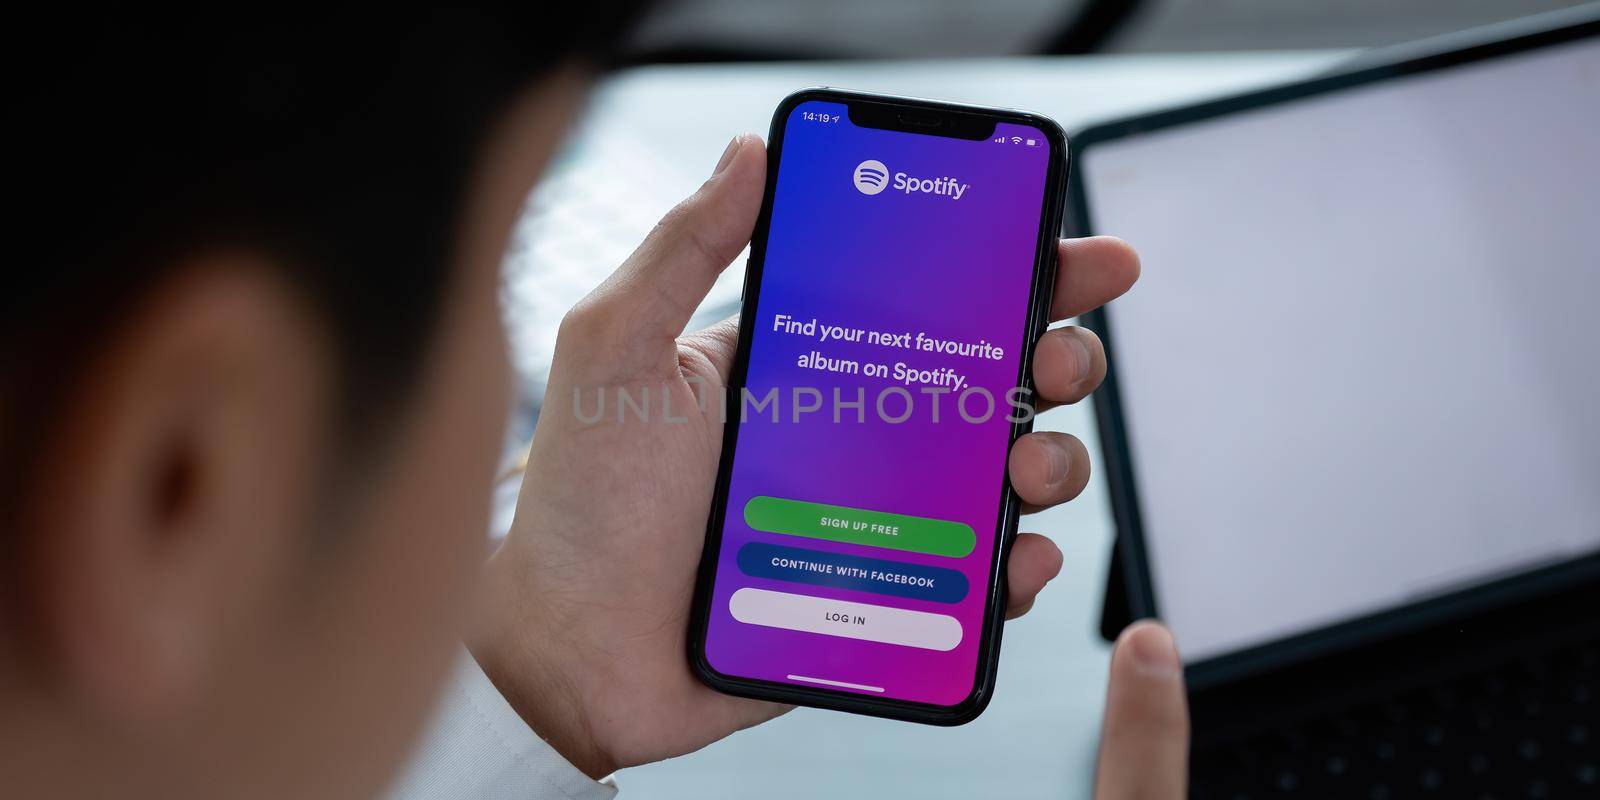 CHIANG MAI, THAILAND - APR 06, 2021: Person holding a brand new Apple iPhone XS with Spotify logo on the screen. Spotify is a popular commercial music streaming service by nateemee